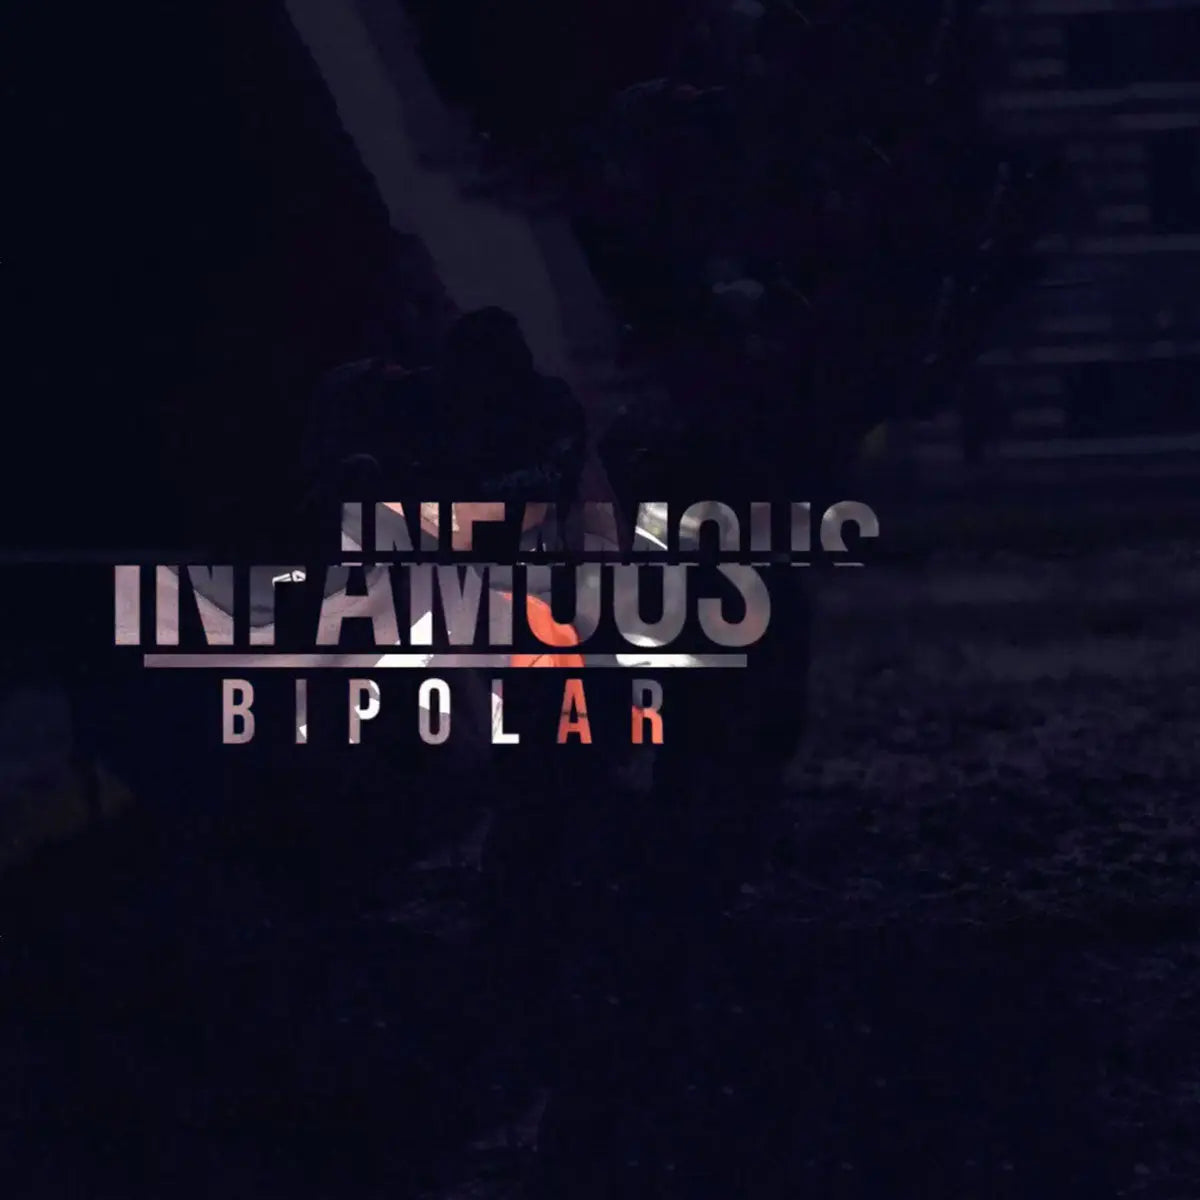 Infamous Bipolar Video Infamous Paintball